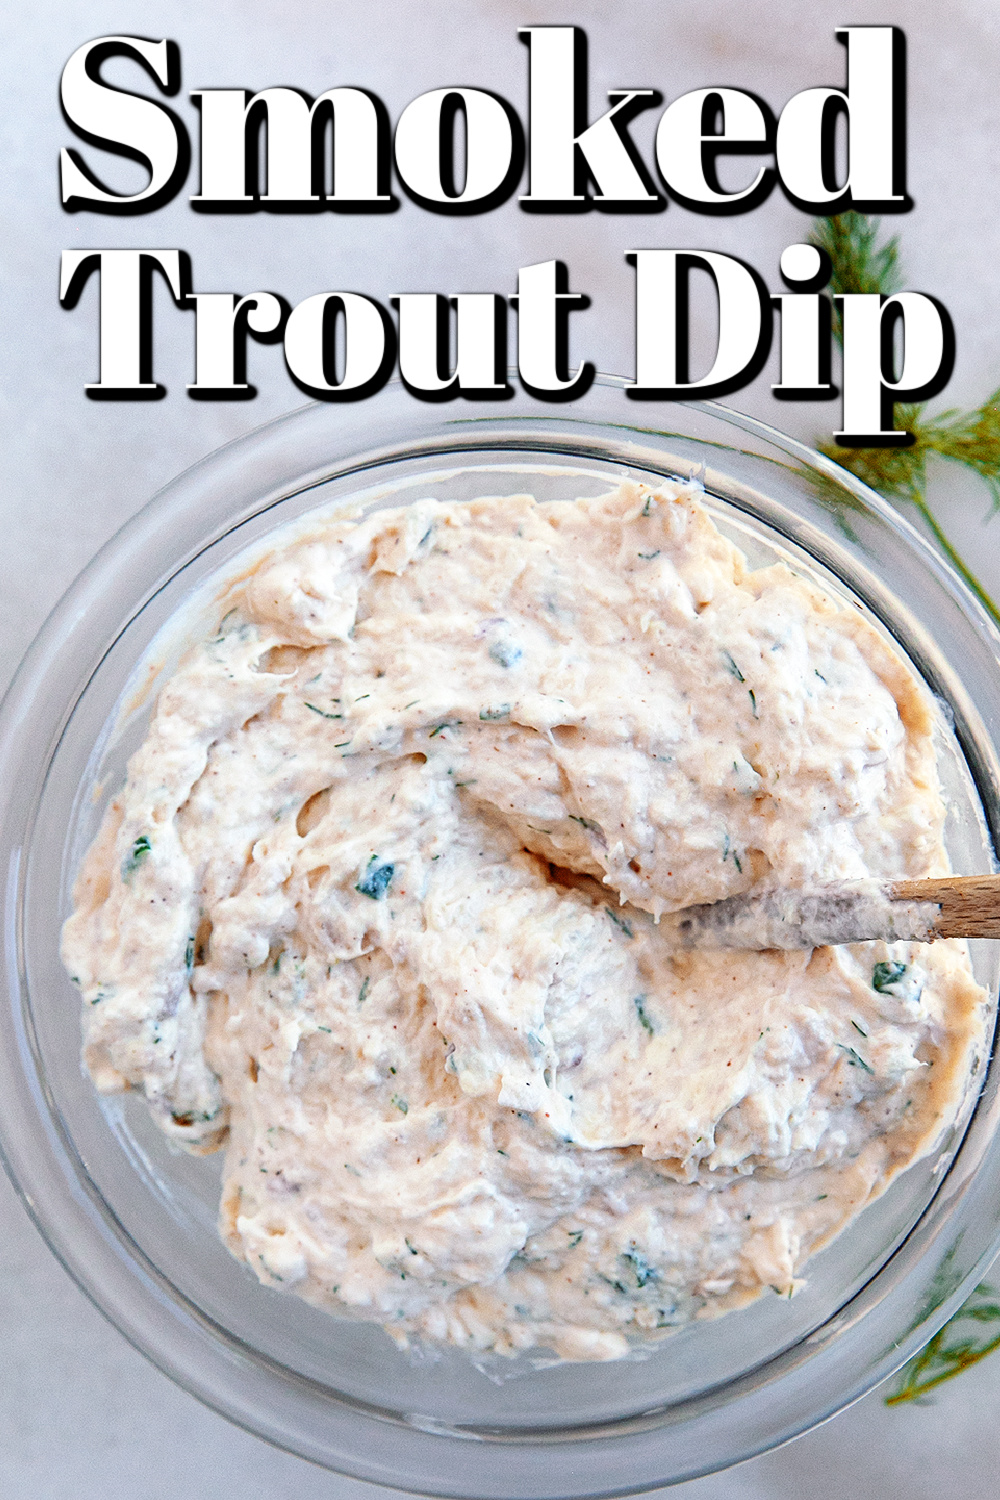 Better make extra because this Smoked Trout Dip is going to be very popular at your next social event!